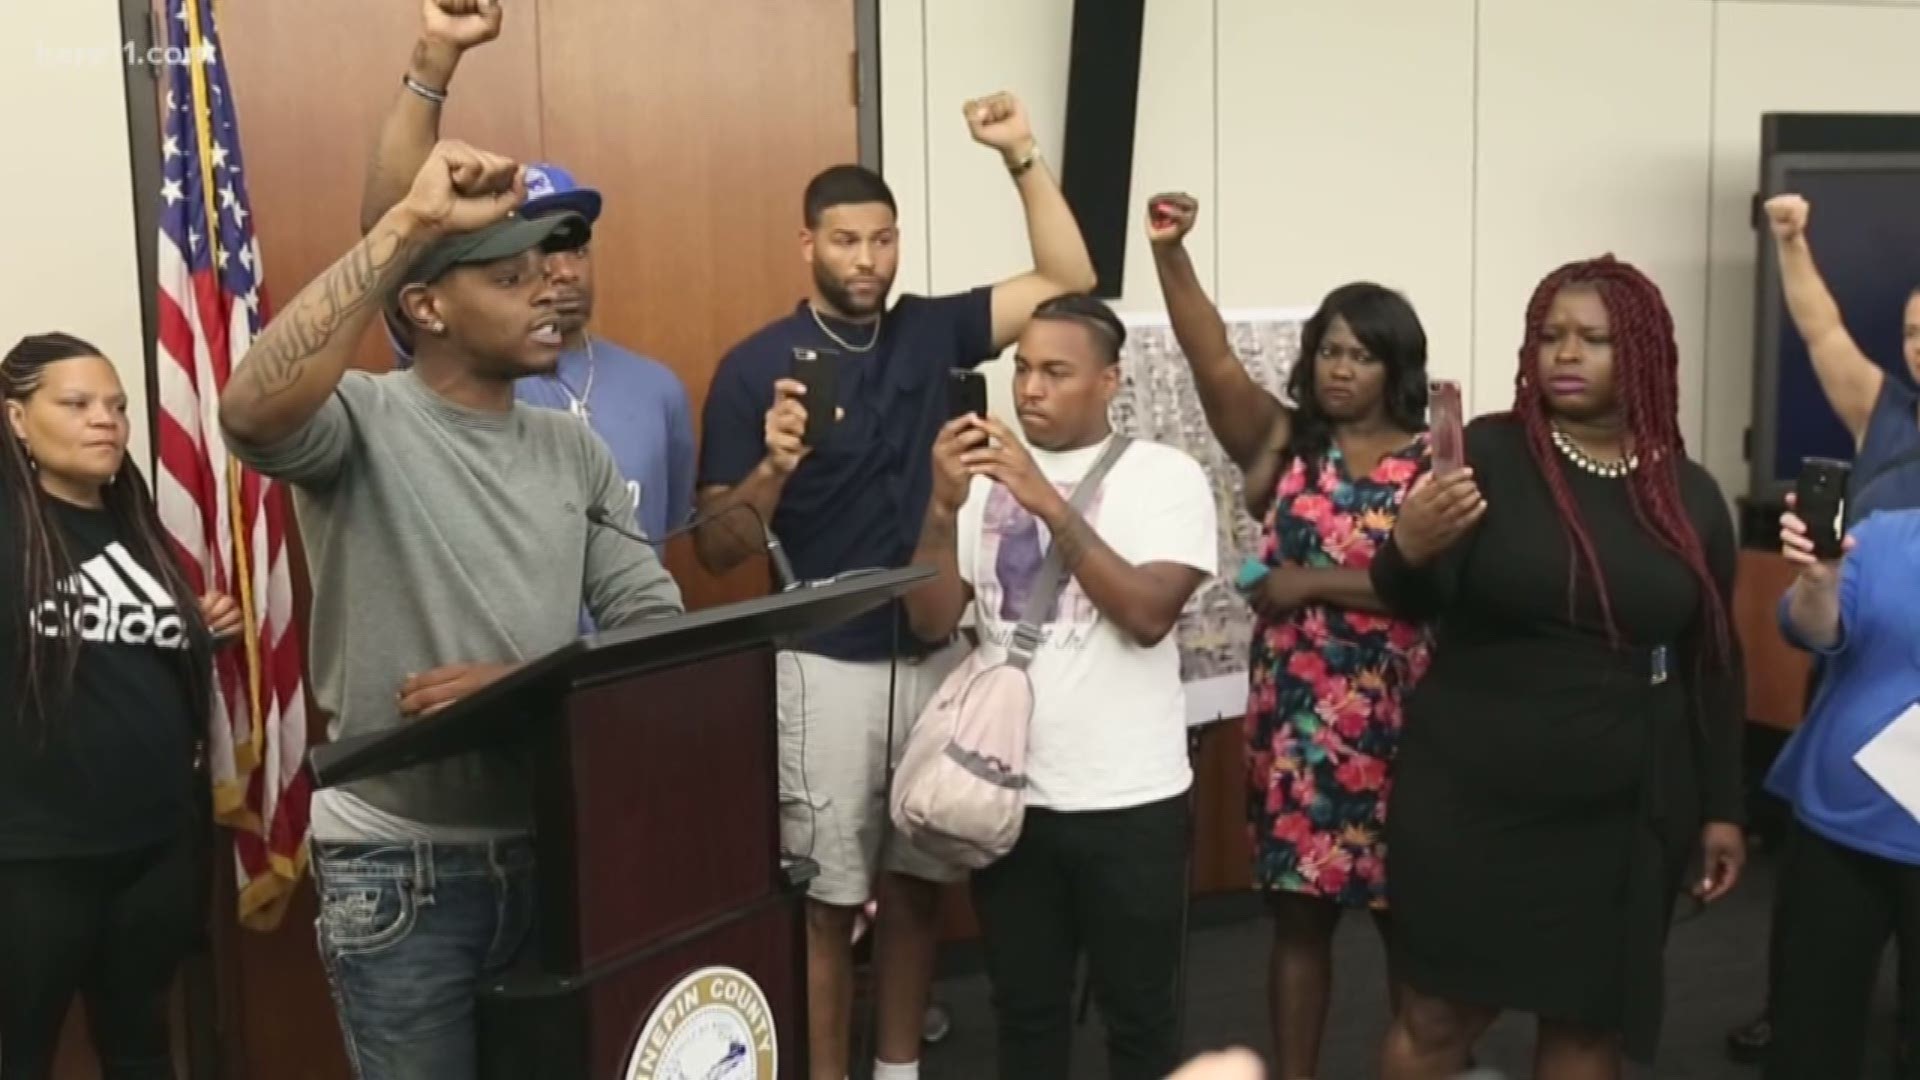 Hennepin County Attorney Mike Freeman was ready to announce his decision on whether two Mpls Police officers would be charged in the fatal shooting of Thurman Blevins (no charges) when family members, activists stormed the podium. 